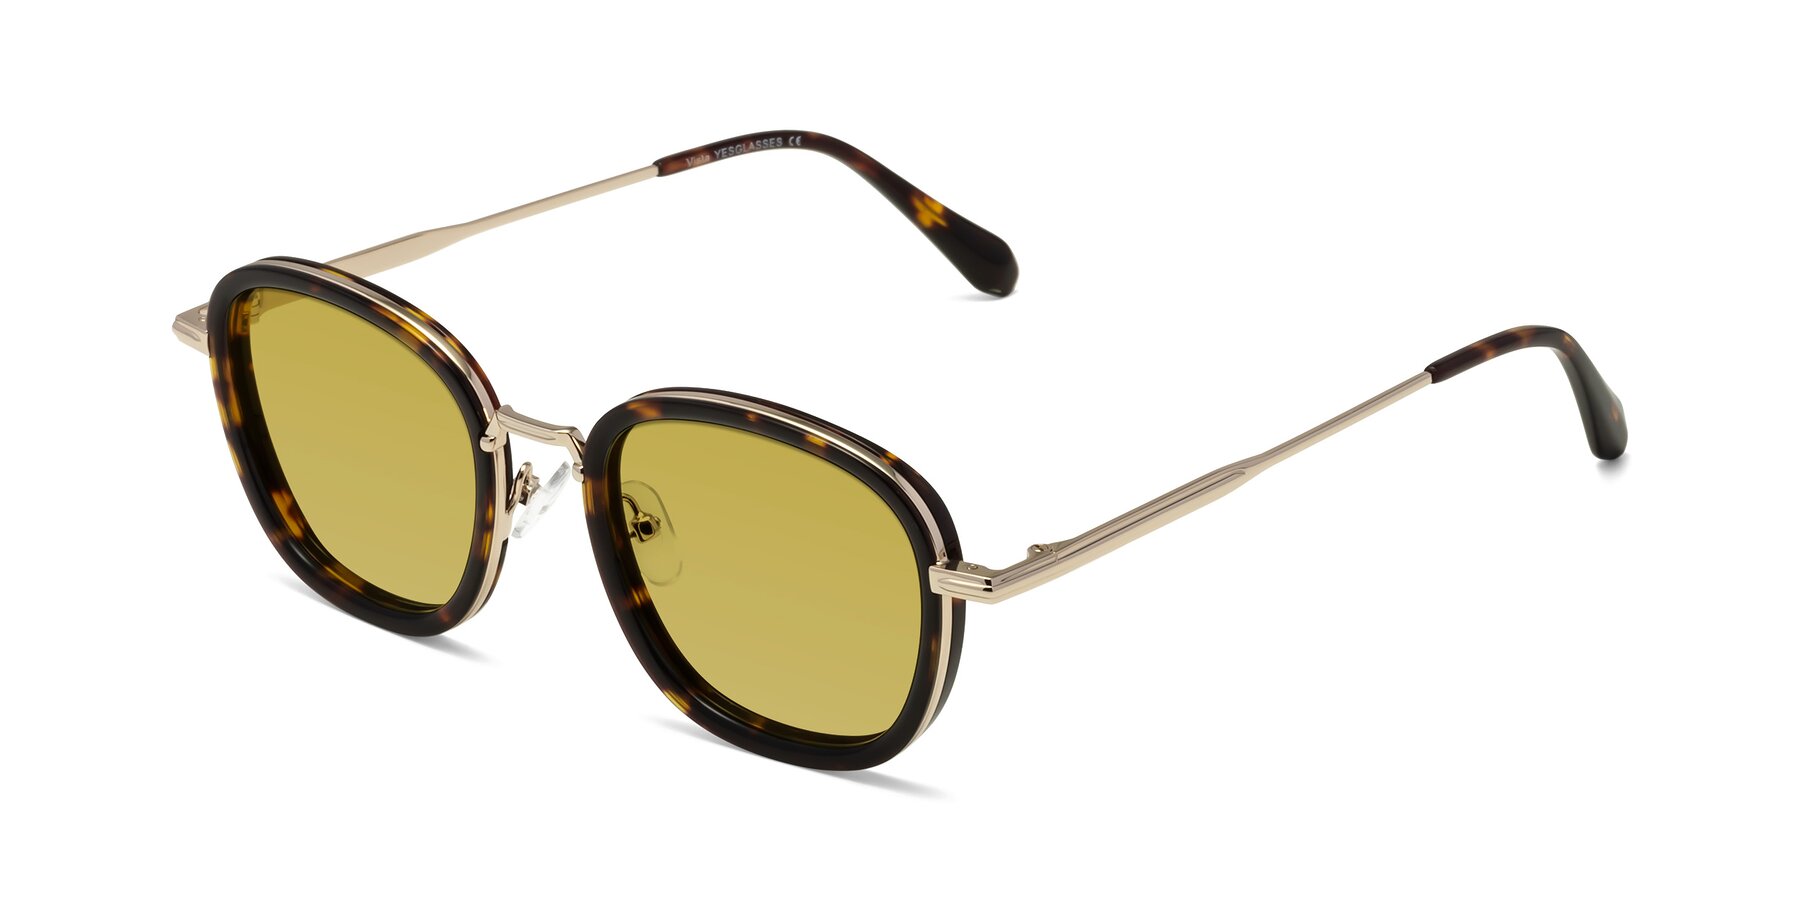 Angle of Vista in Tortoise-Light Gold with Champagne Tinted Lenses